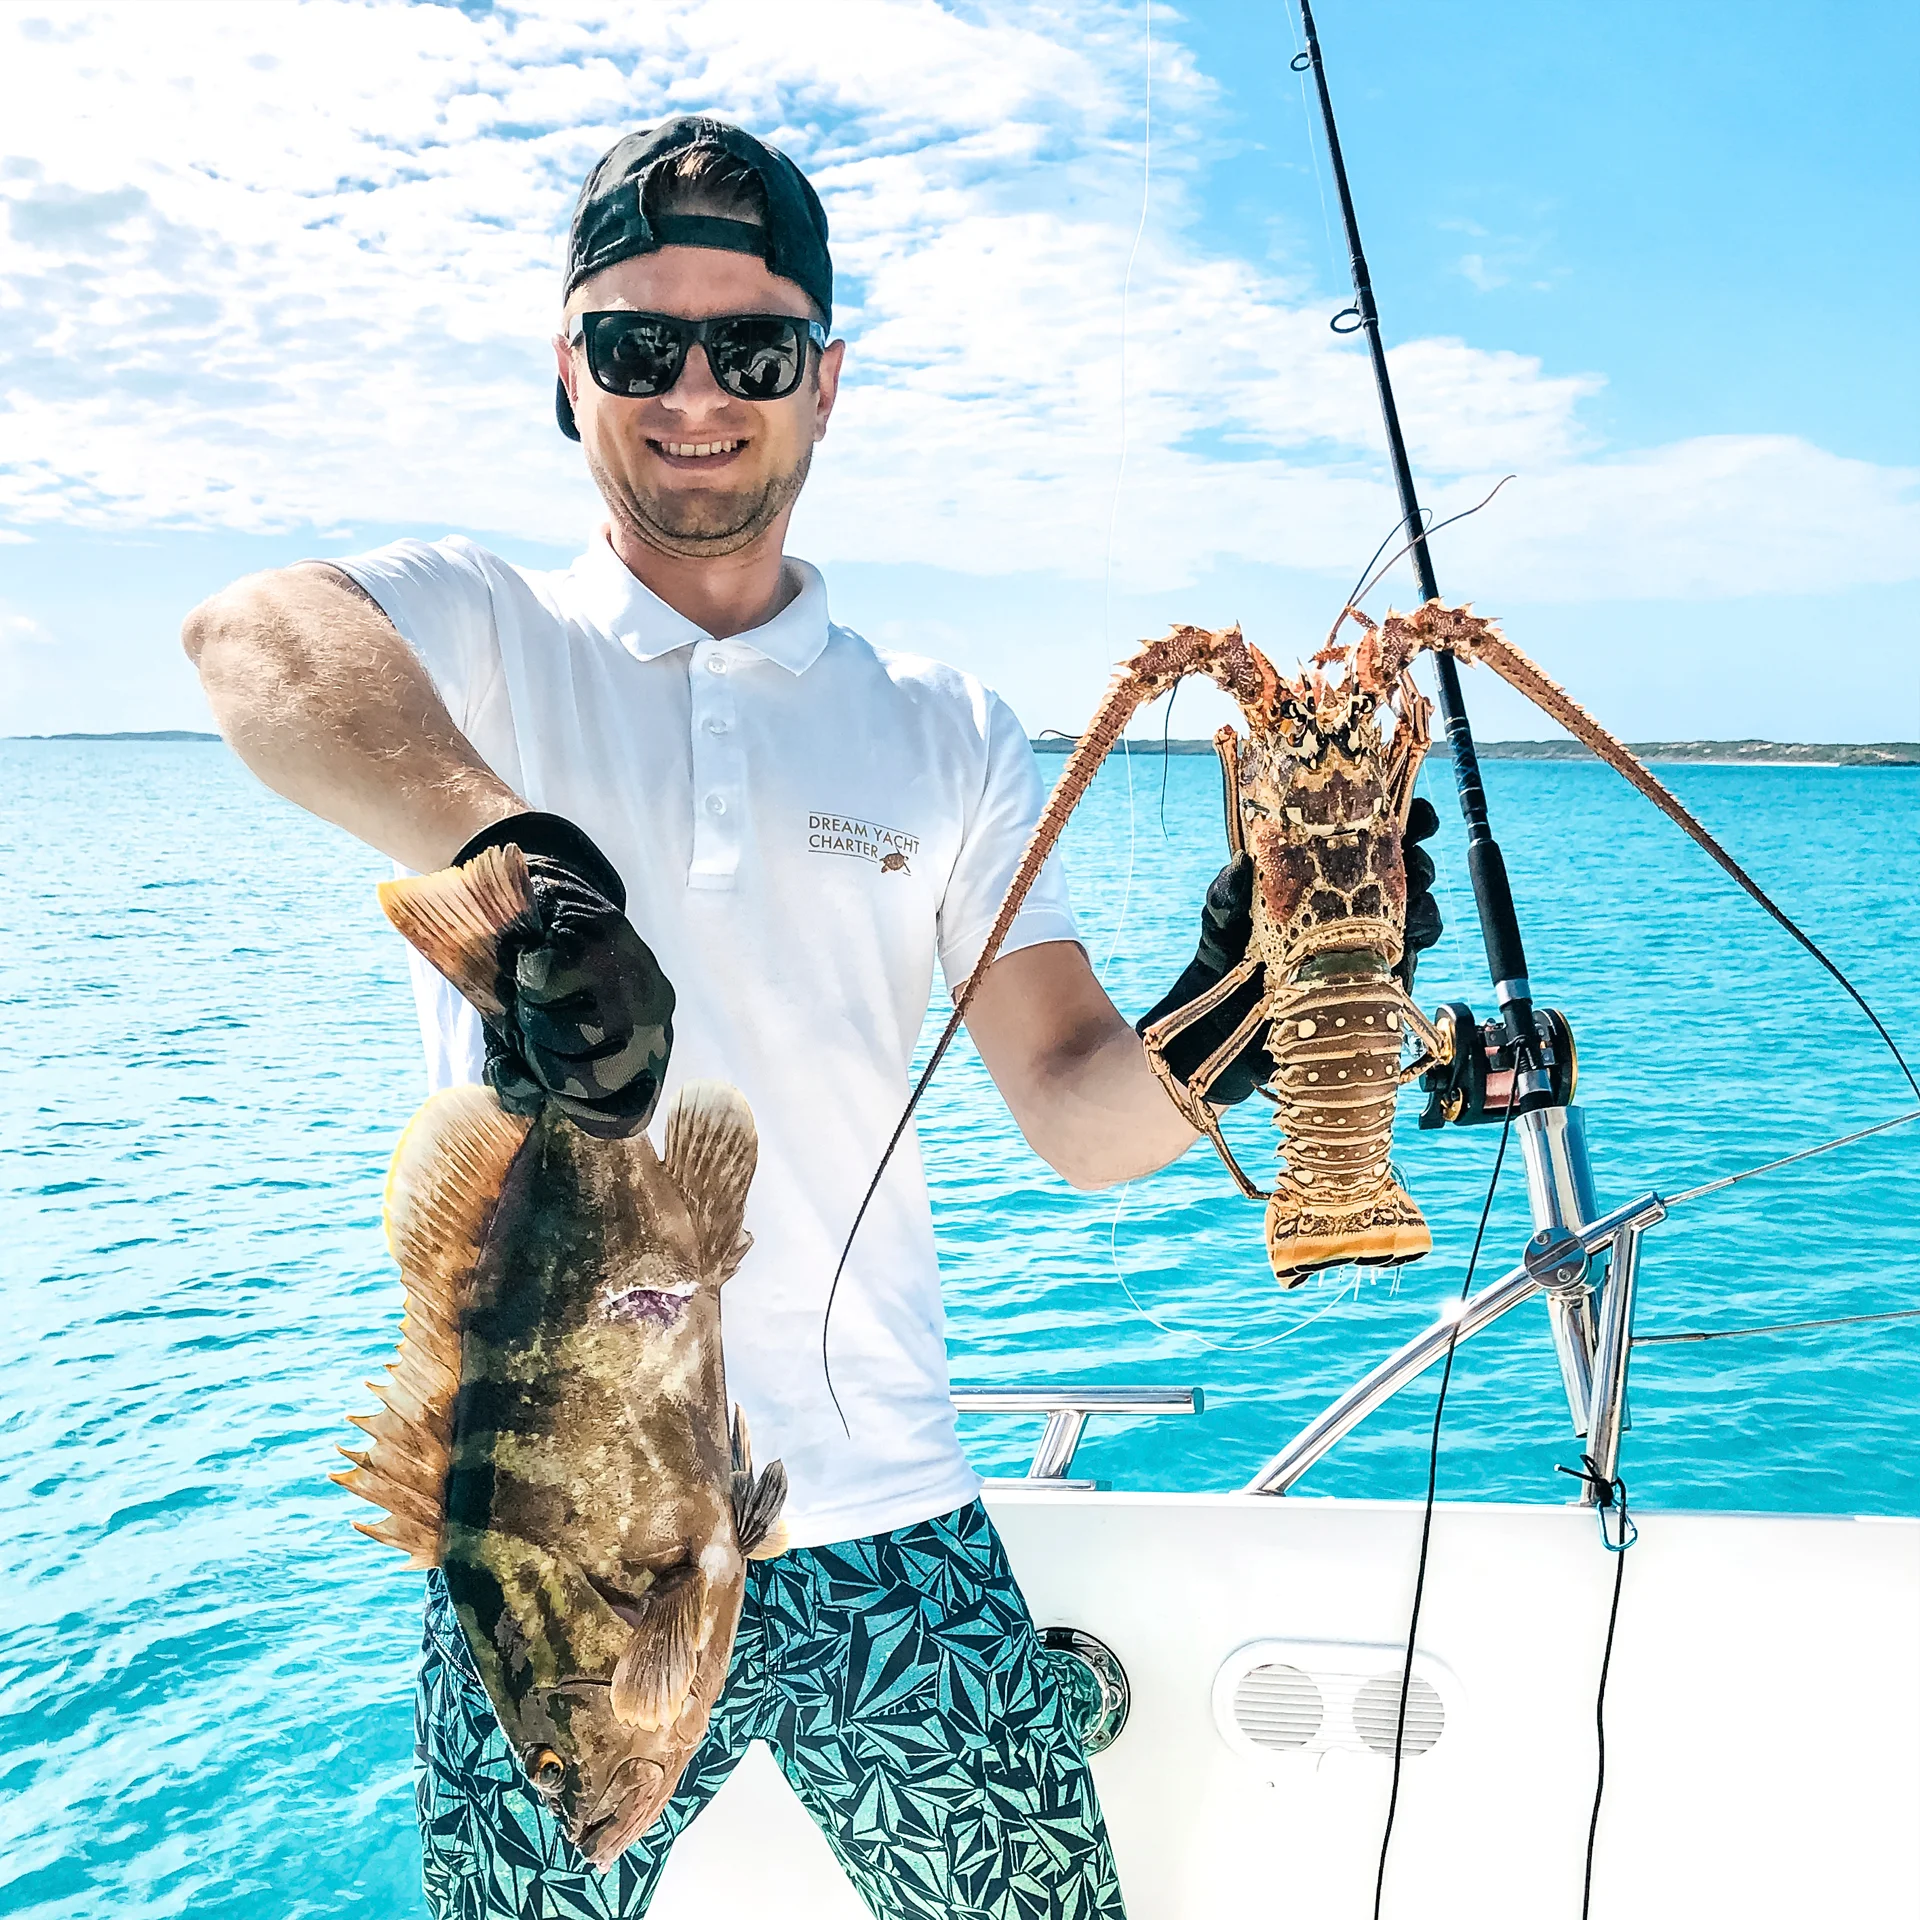 Bahamas guest enjoying sailing vacations in yacht with lobsters